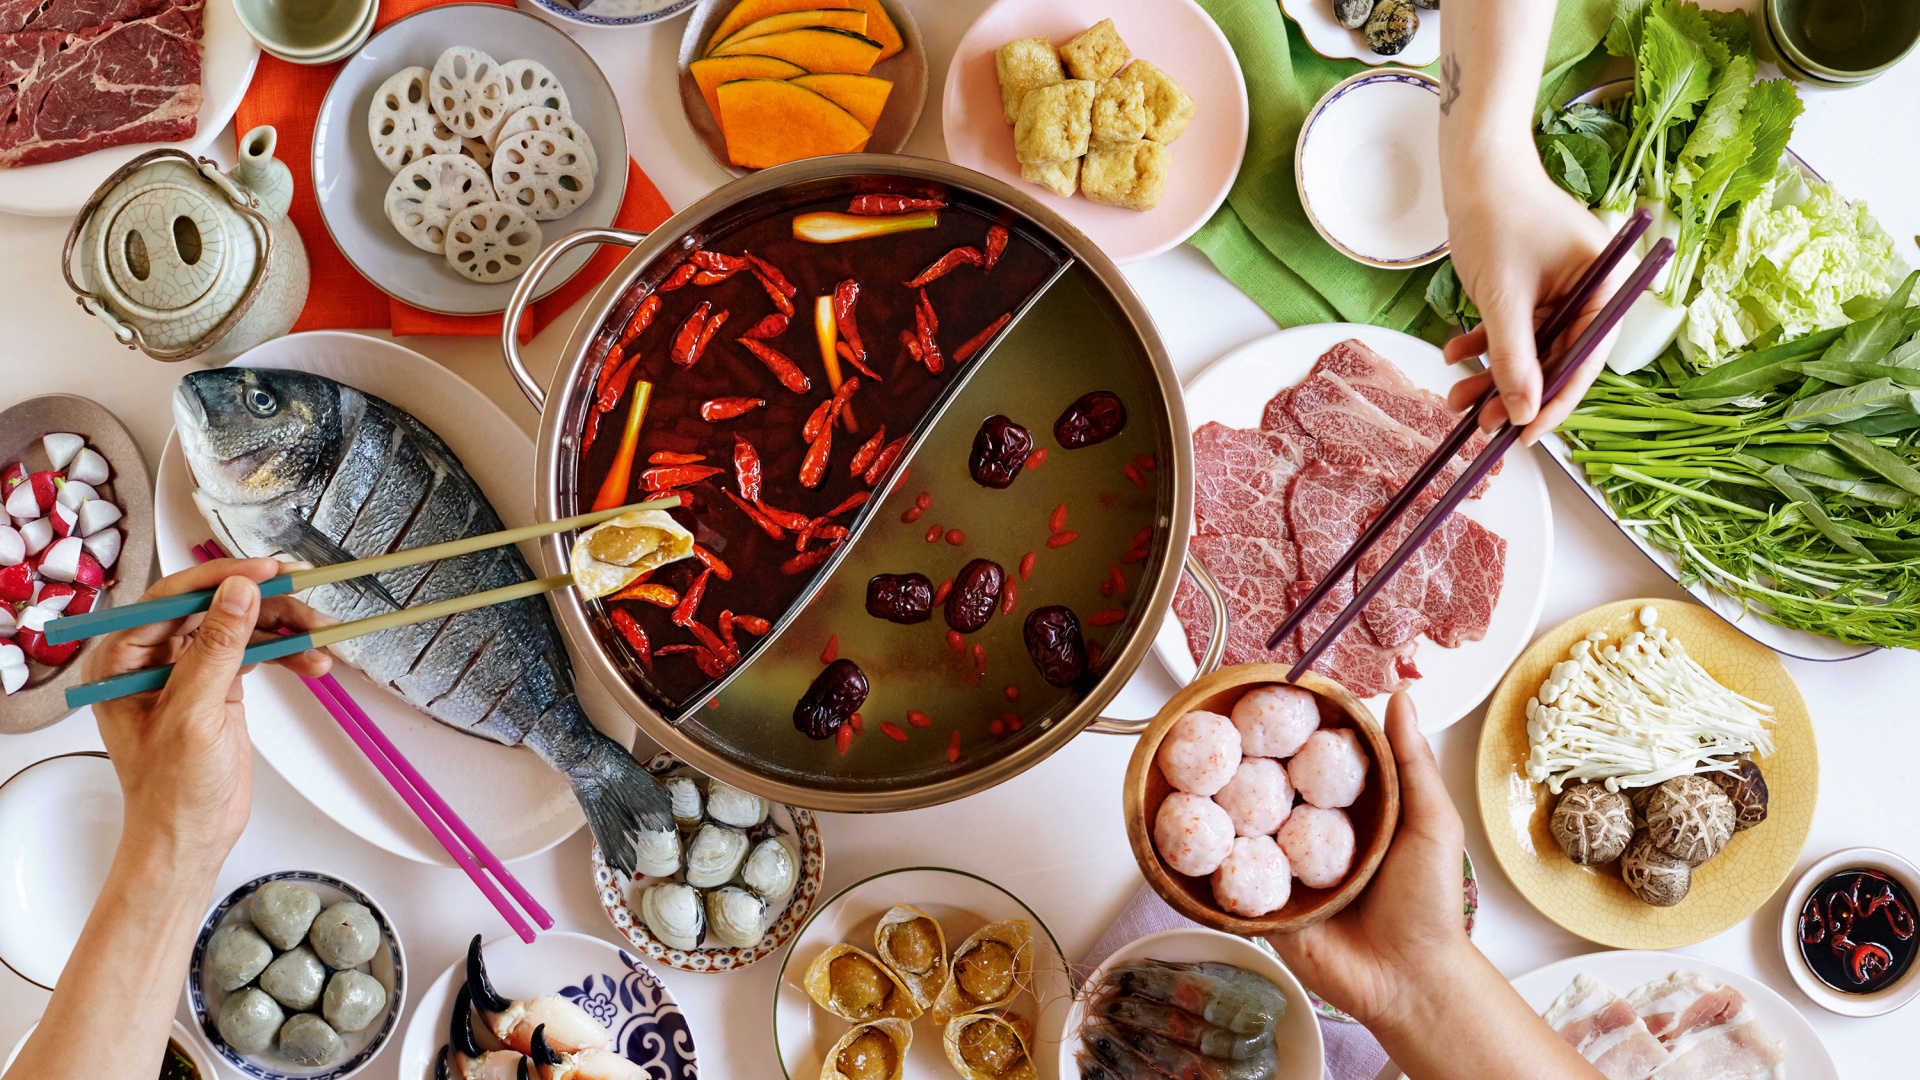 Regional Chinese Food And Where To Find It In London - Chinese Hot Pot London - HD Wallpaper 